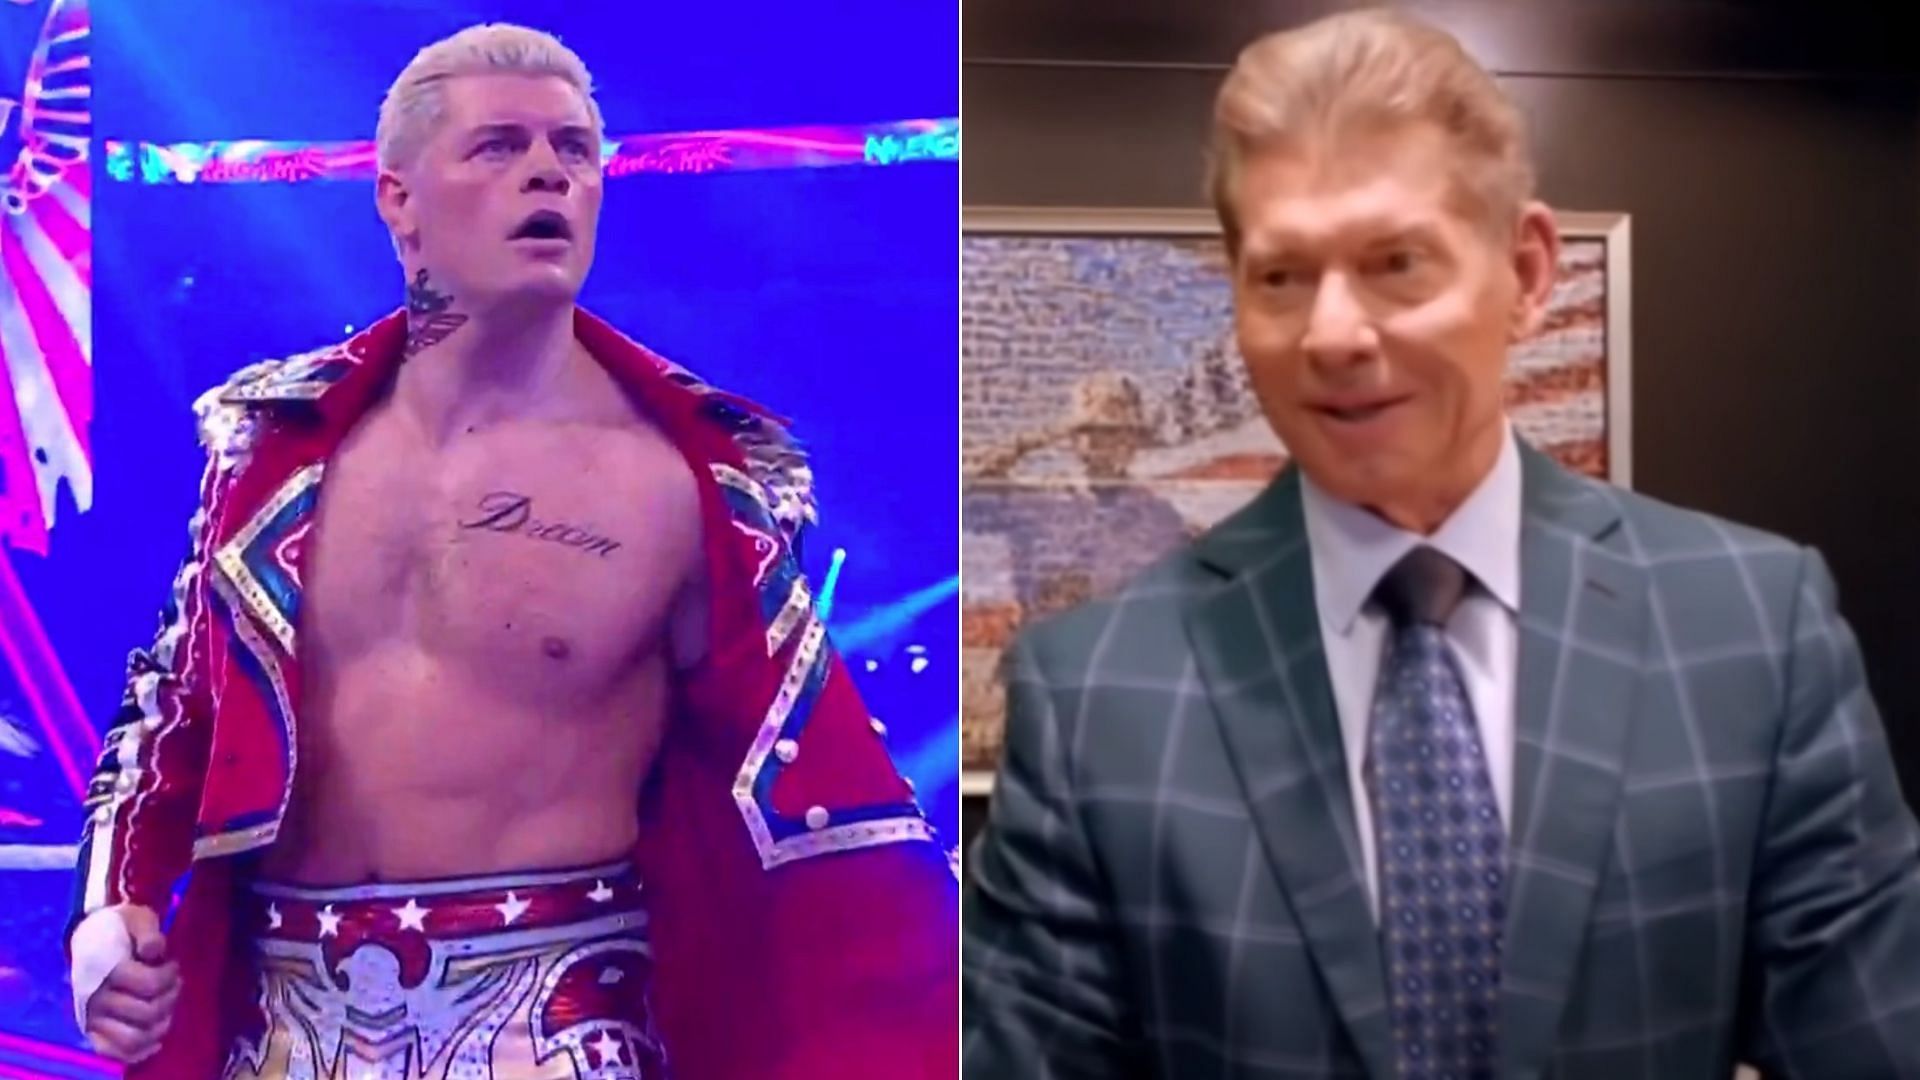 Cody Rhodes was pleased with the conversations he had with Vince McMahon.